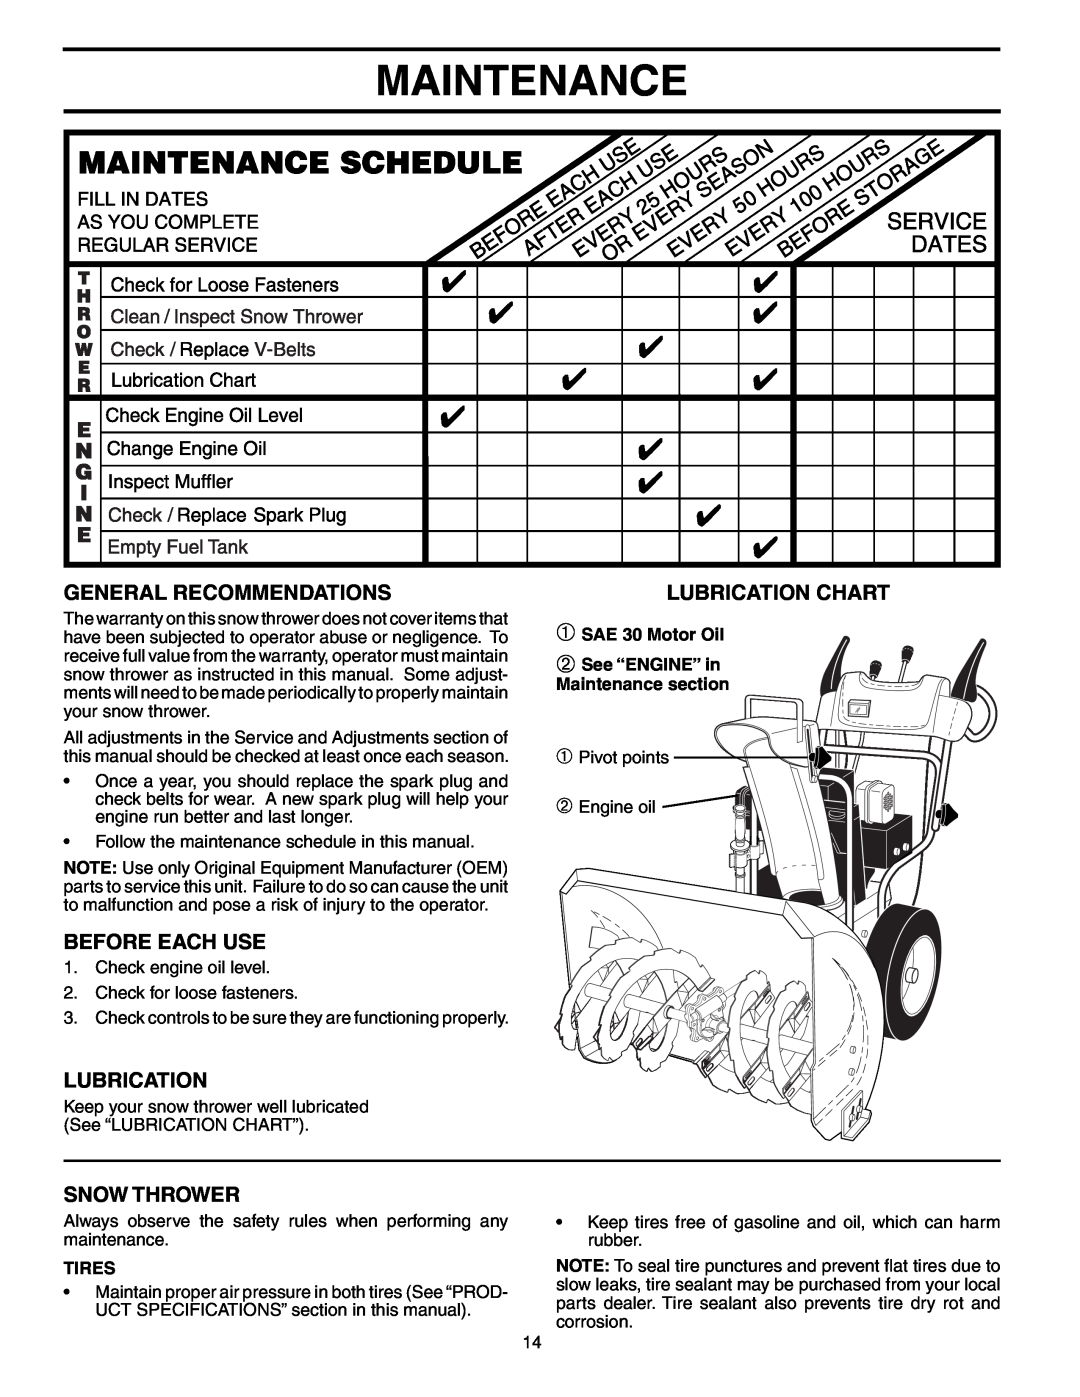 Poulan PR524ESA Maintenance, General Recommendations, Before Each Use, Snow Thrower, Lubrication Chart, Tires 